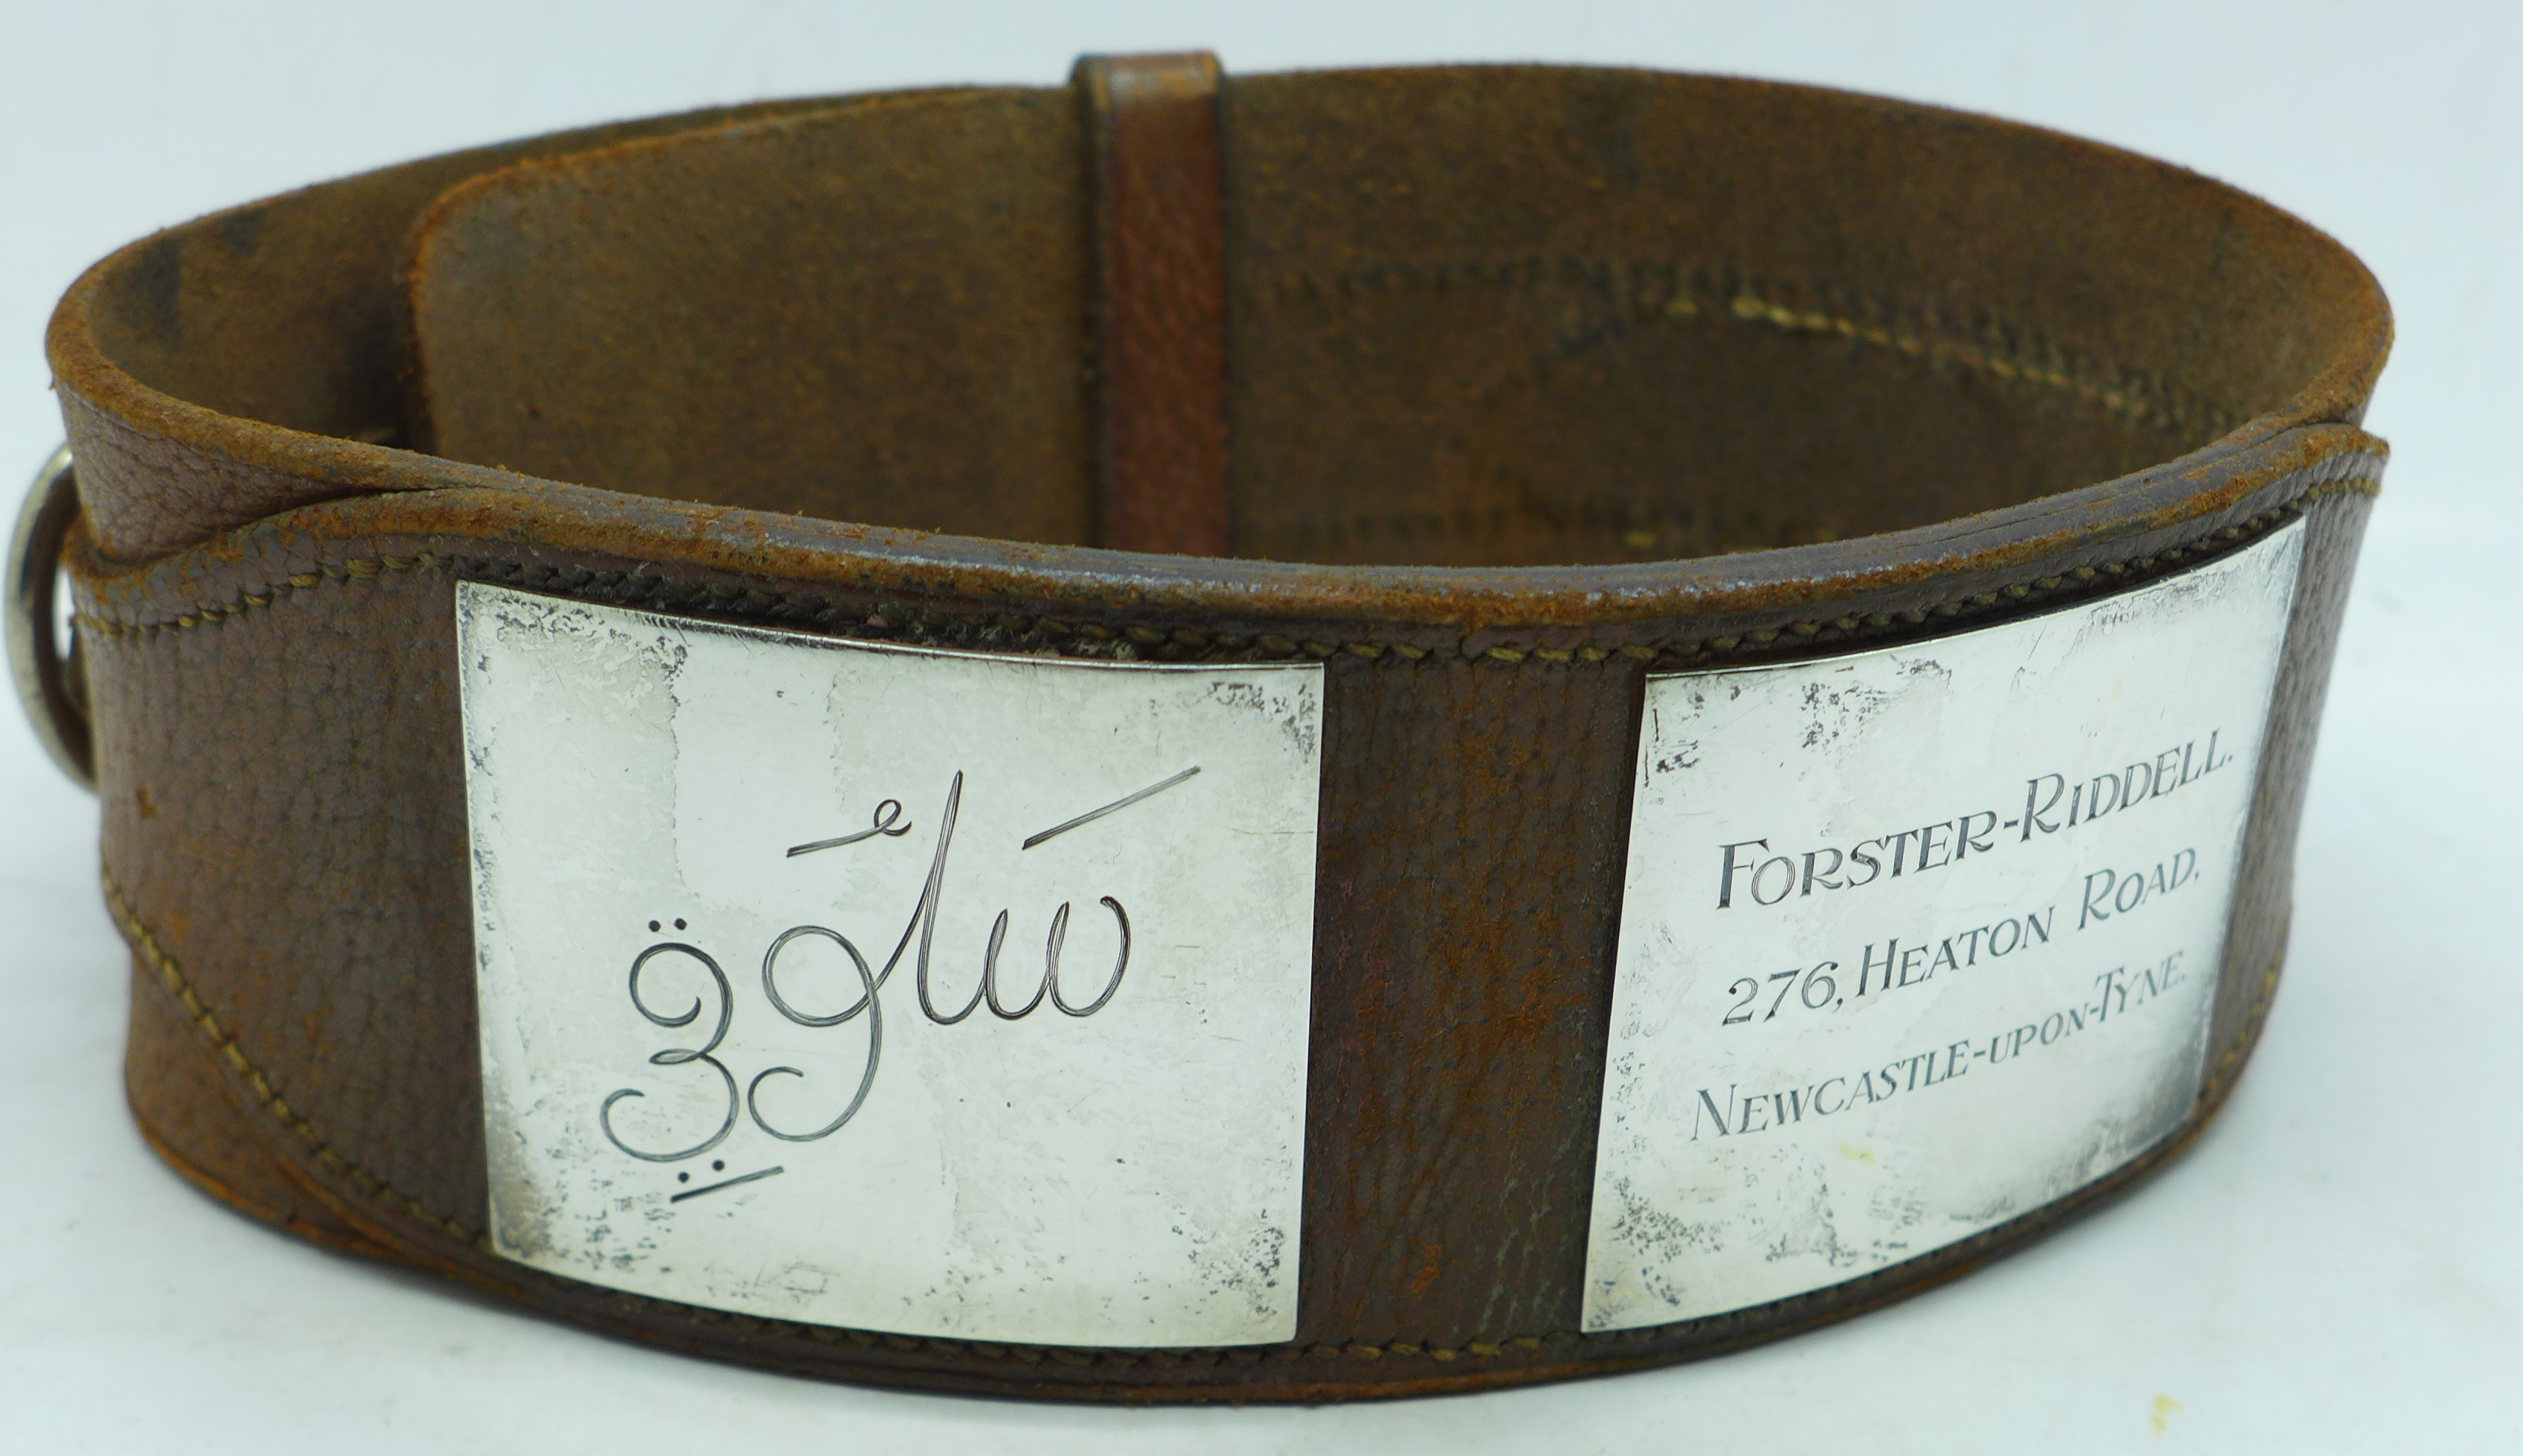 A leather greyhound collar with owner's name and dog's name